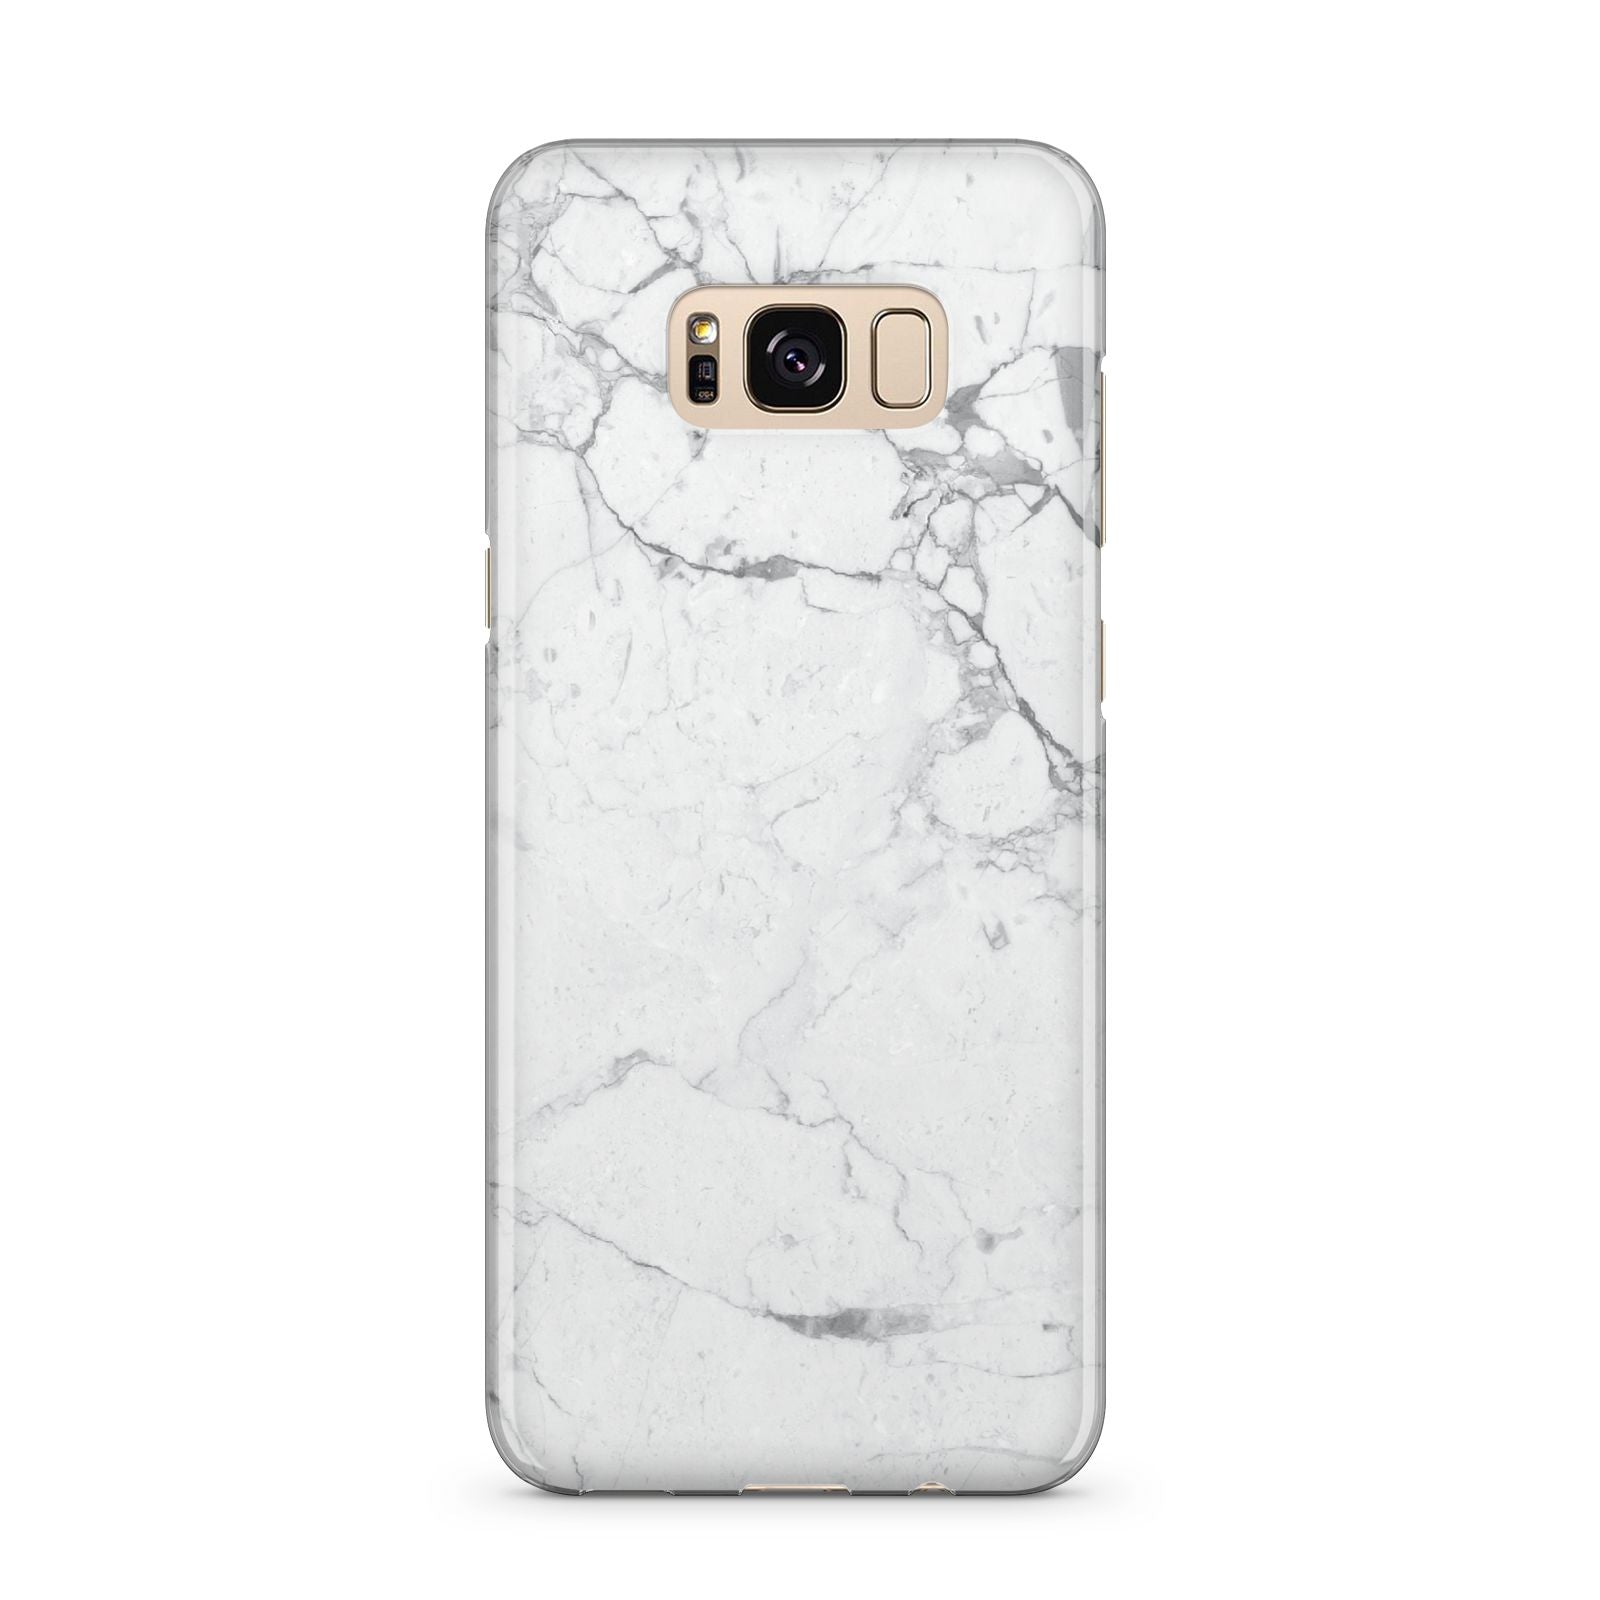 Faux Marble Effect Grey White Samsung Galaxy S8 Plus Case